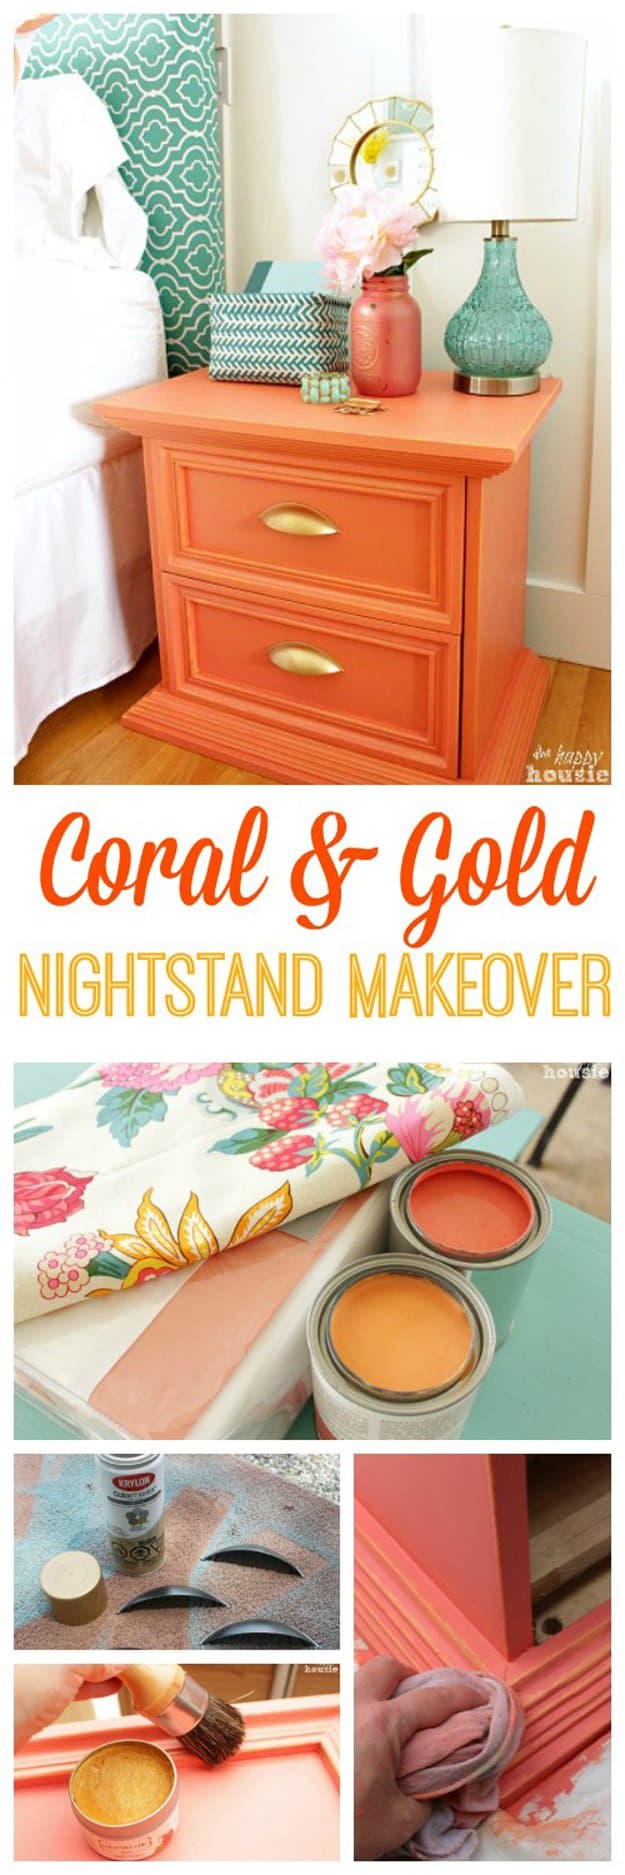 25. NESTLE A CORAL AND GOLD NIGHTSTAND IN YOUR DECOR